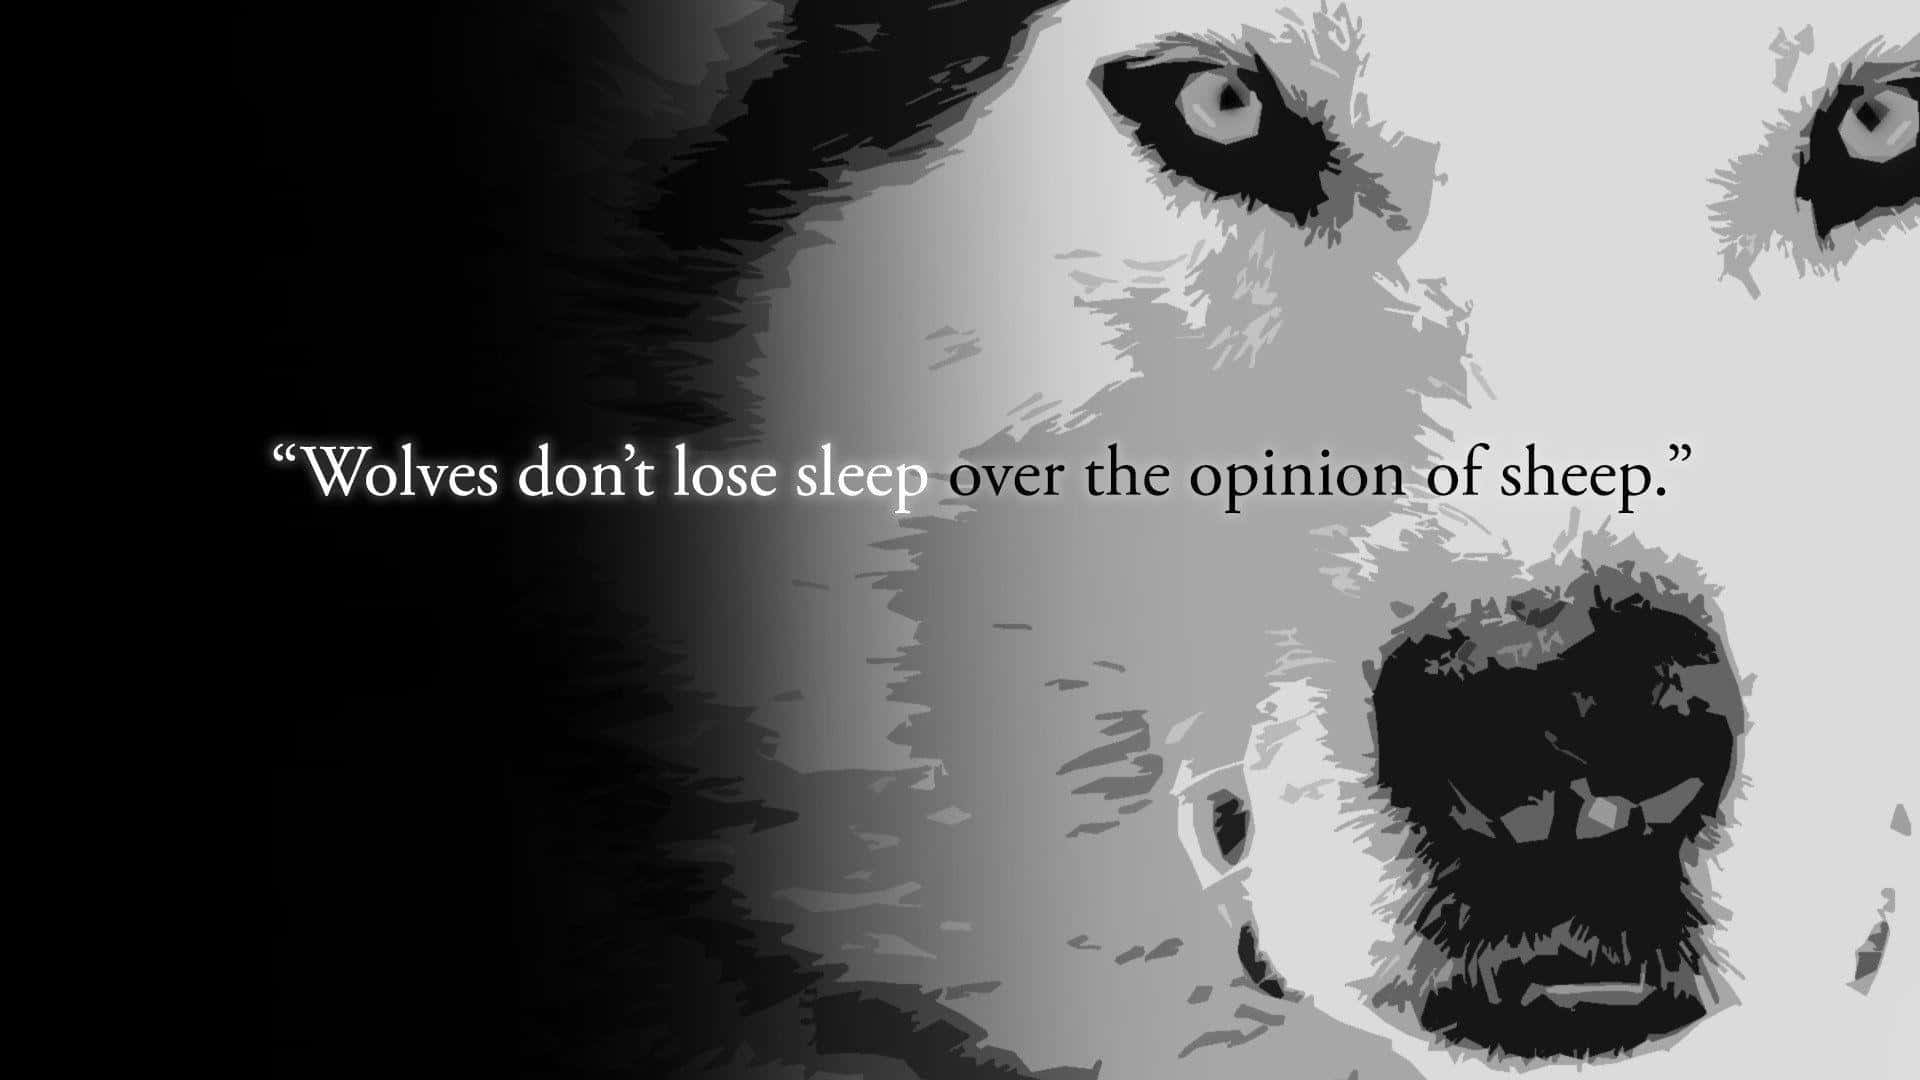 Wolves Opinionof Sheep Quote Wallpaper